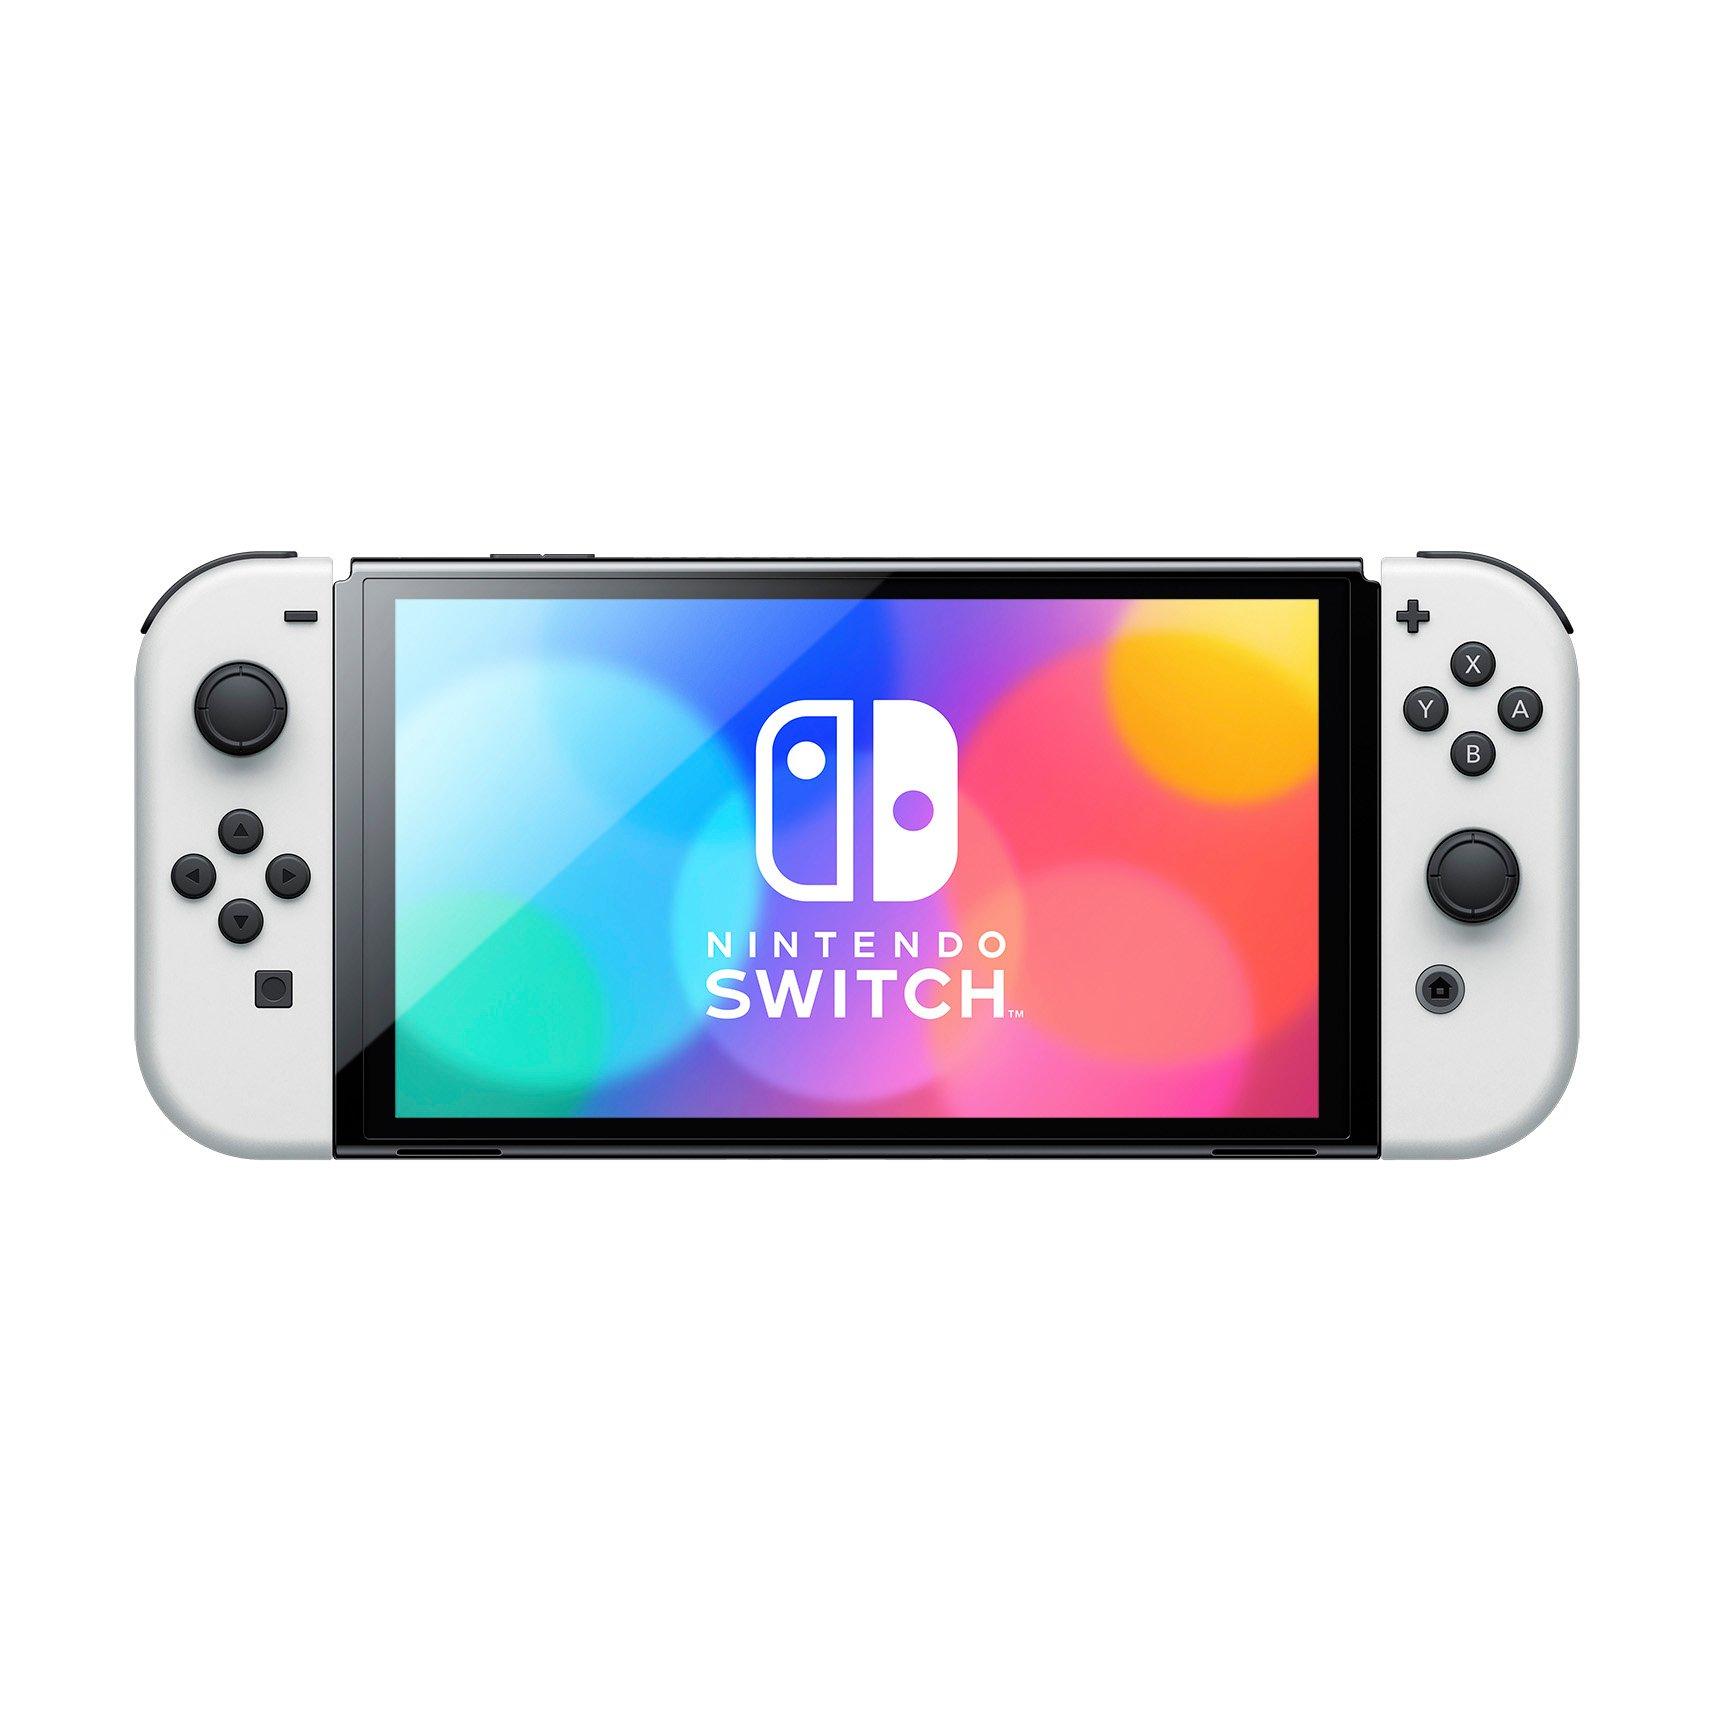 Mayo cobre nieve Nintendo Switch OLED Console with White Joy-Con | GameStop